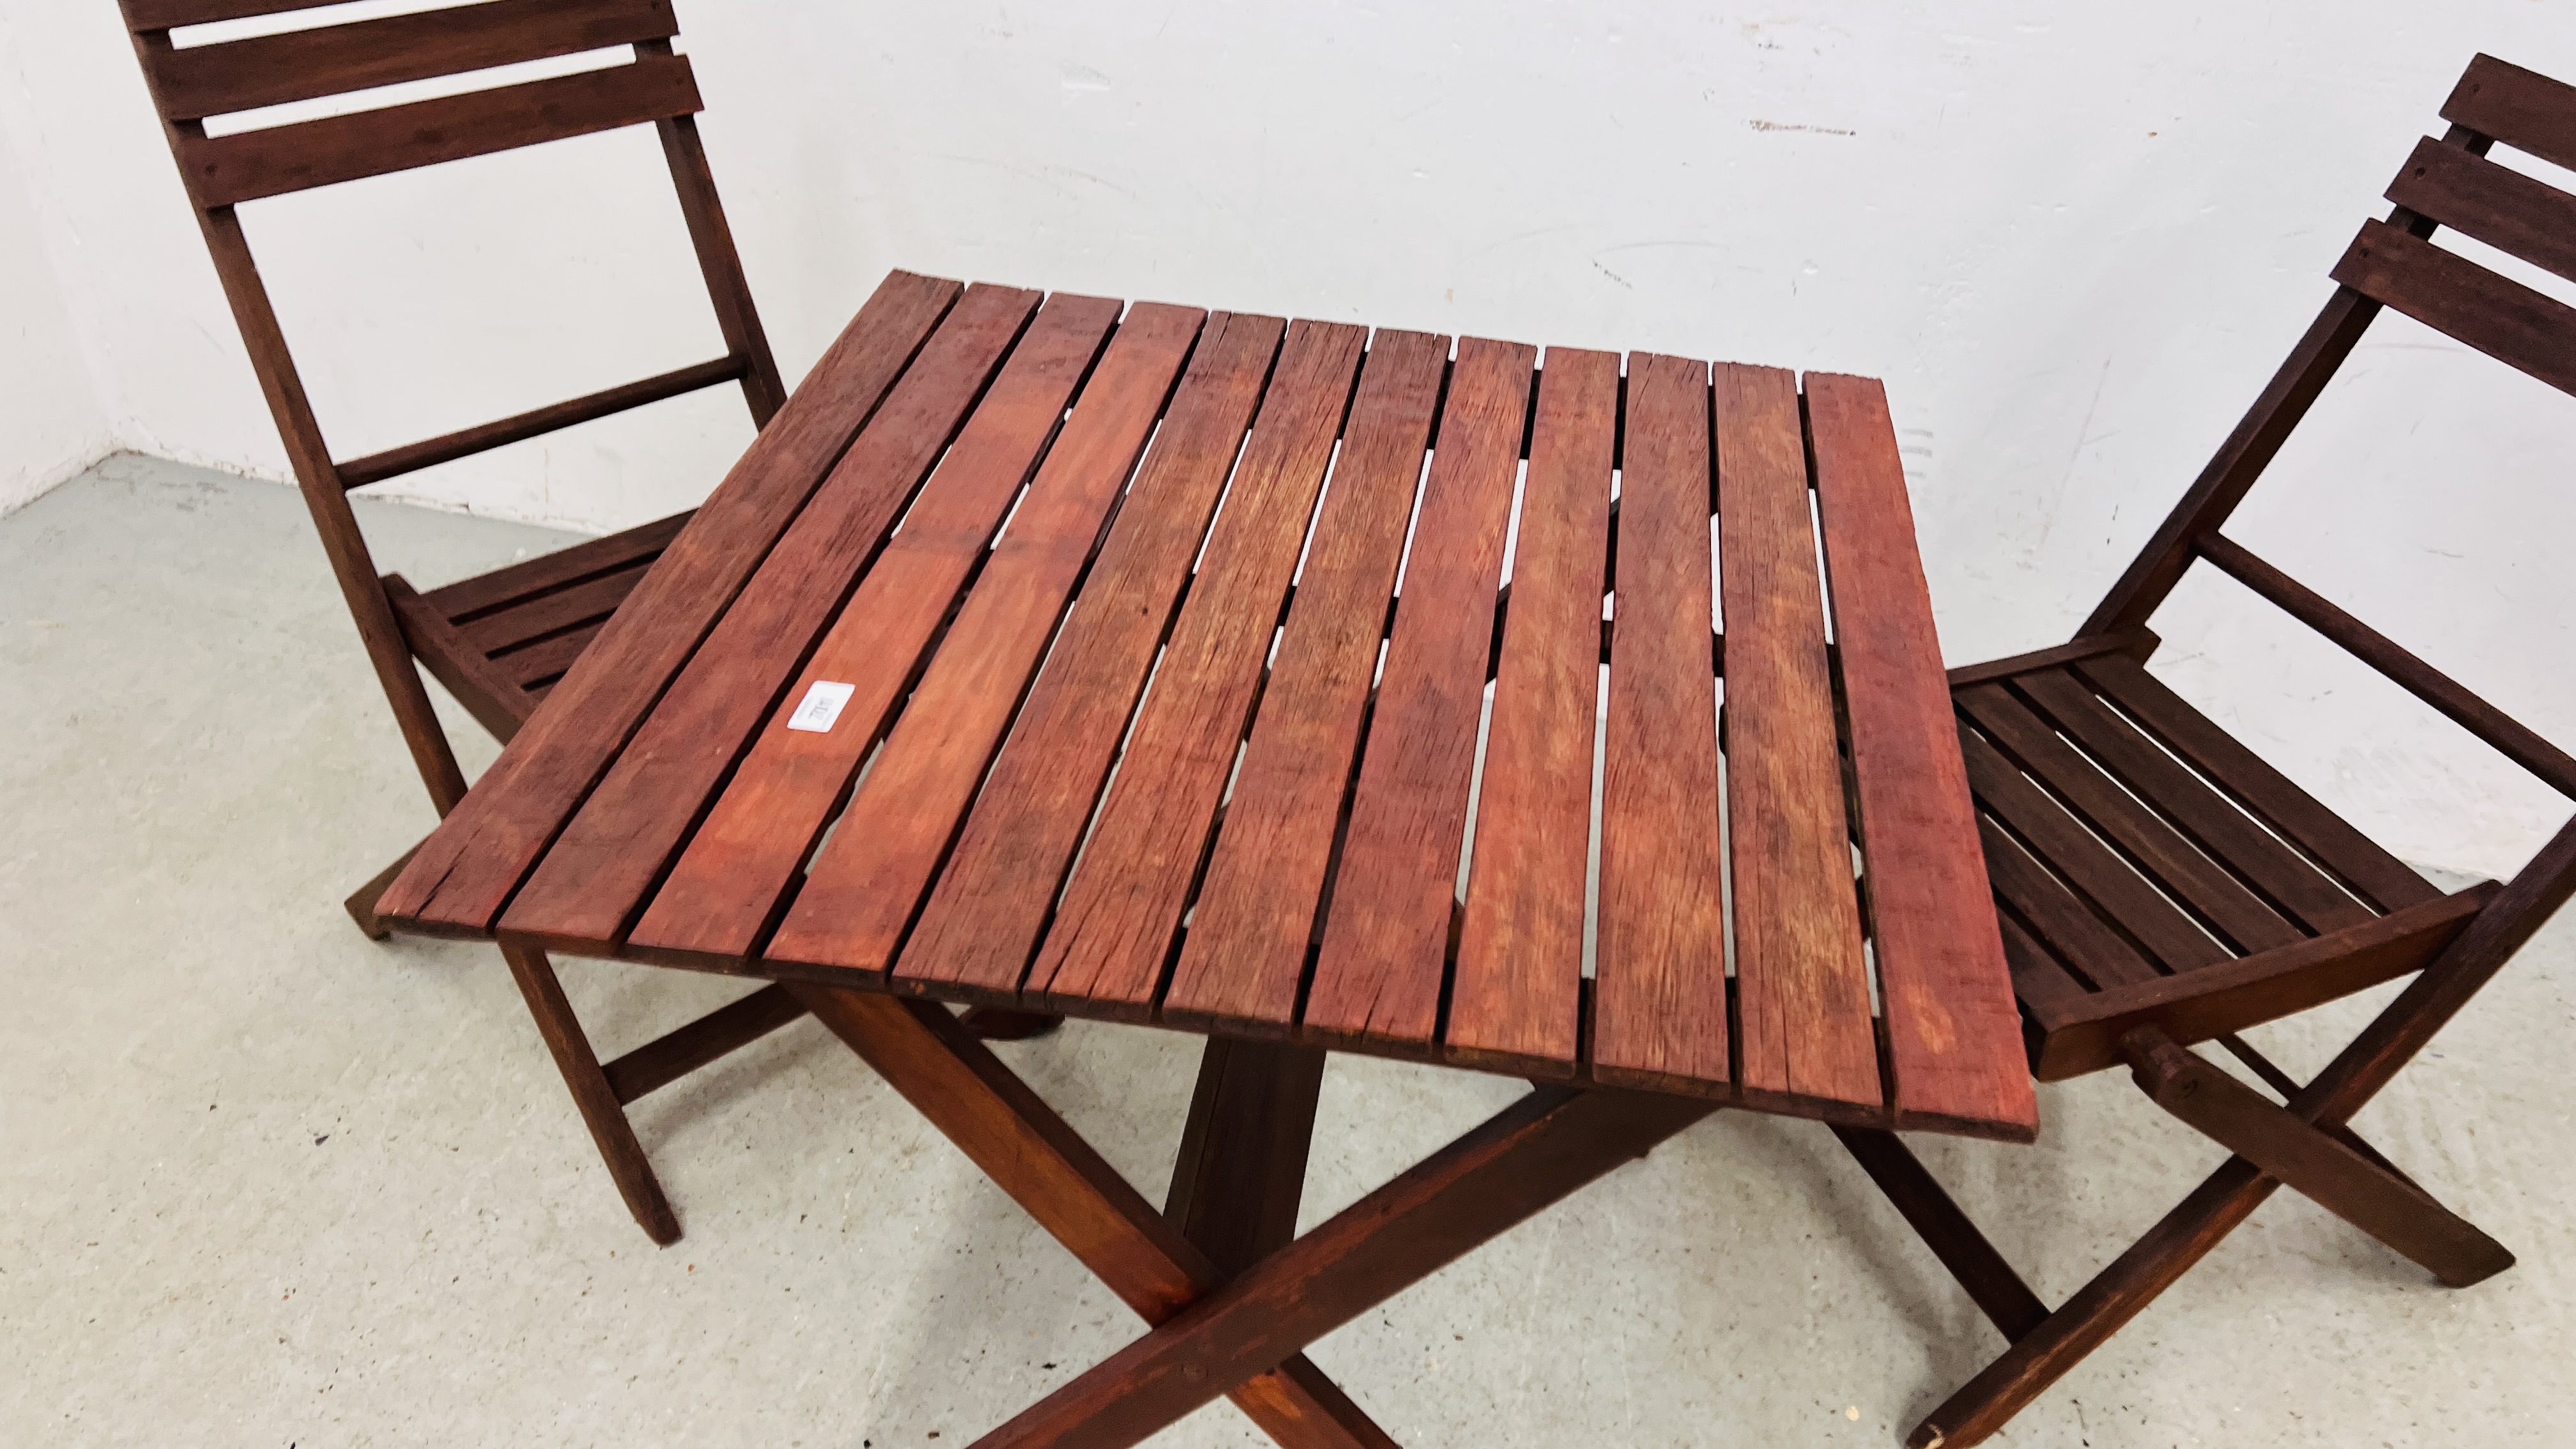 A GARDEN BISTRO TABLE AND 2 CHAIRS. - Image 2 of 11